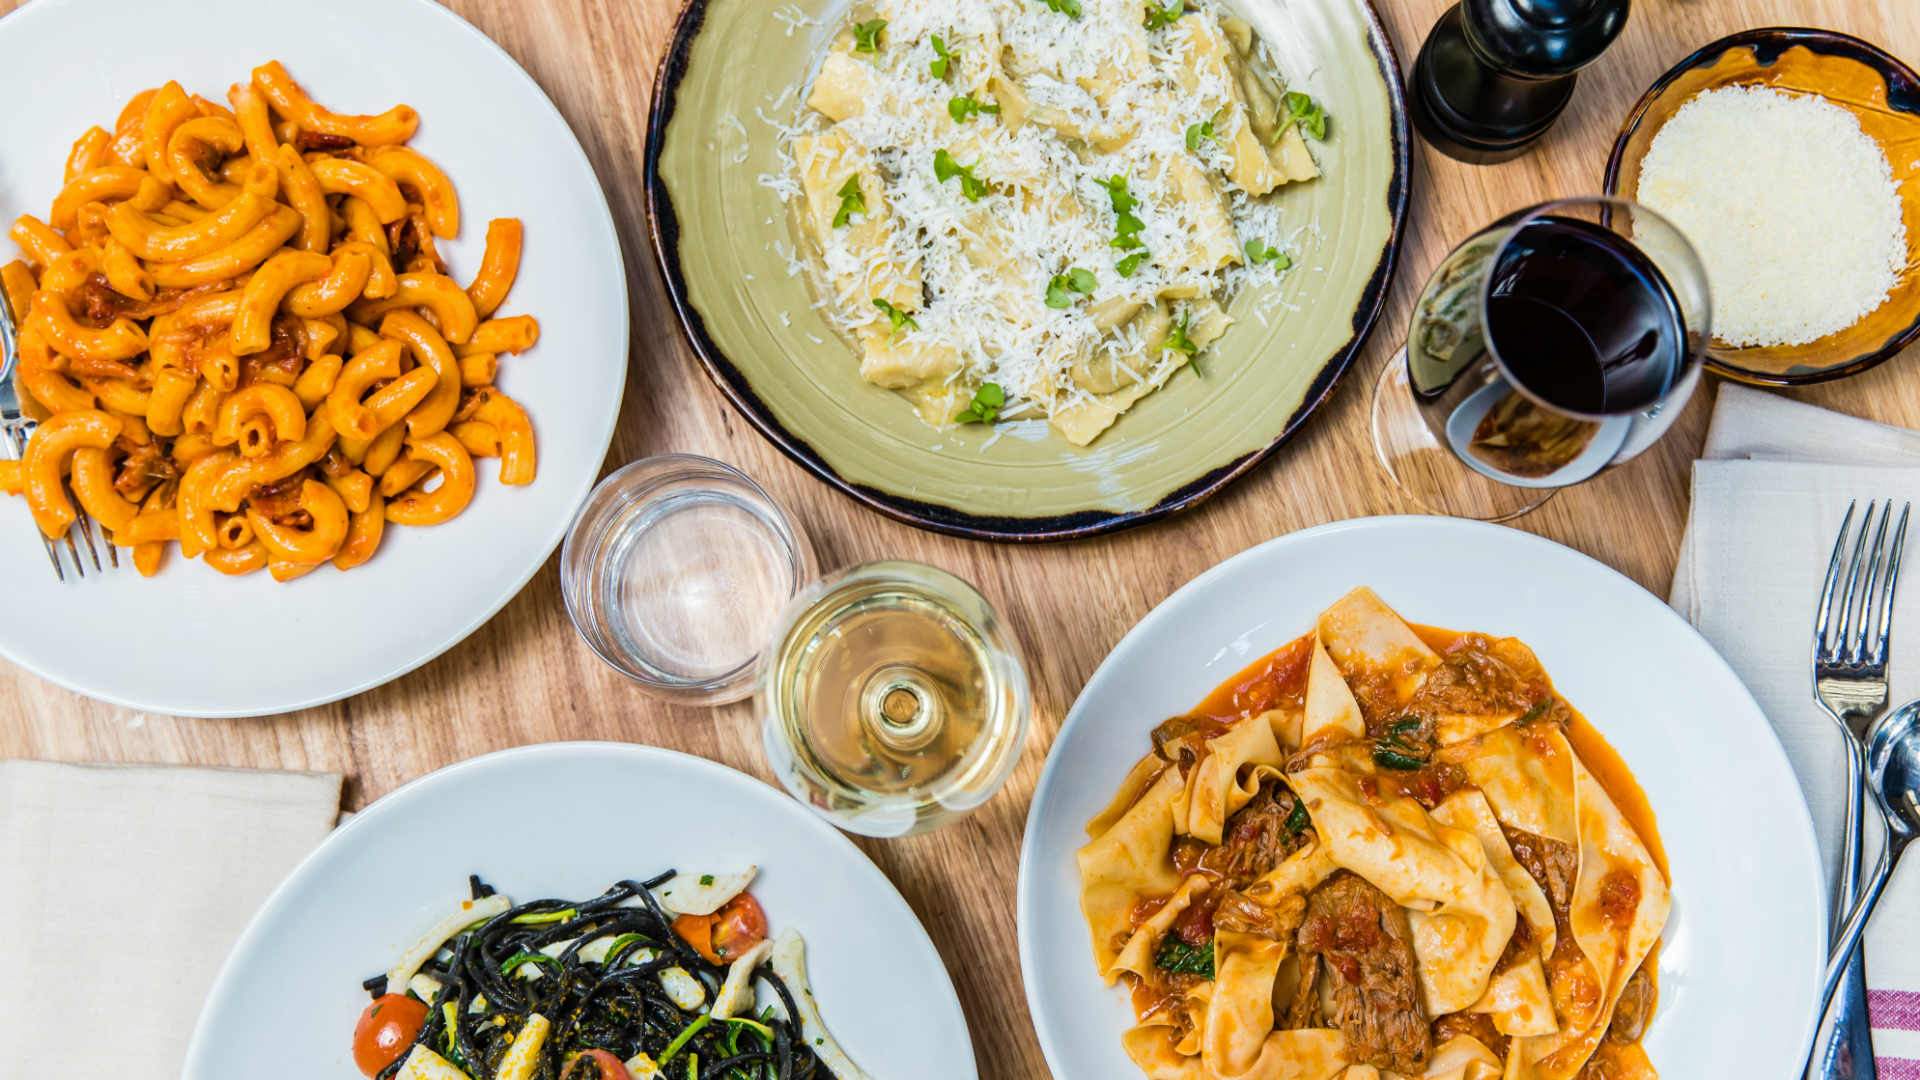 Where to Go When a Big Bowl of Pasta Is the Only Thing That Will Make You Feel Better